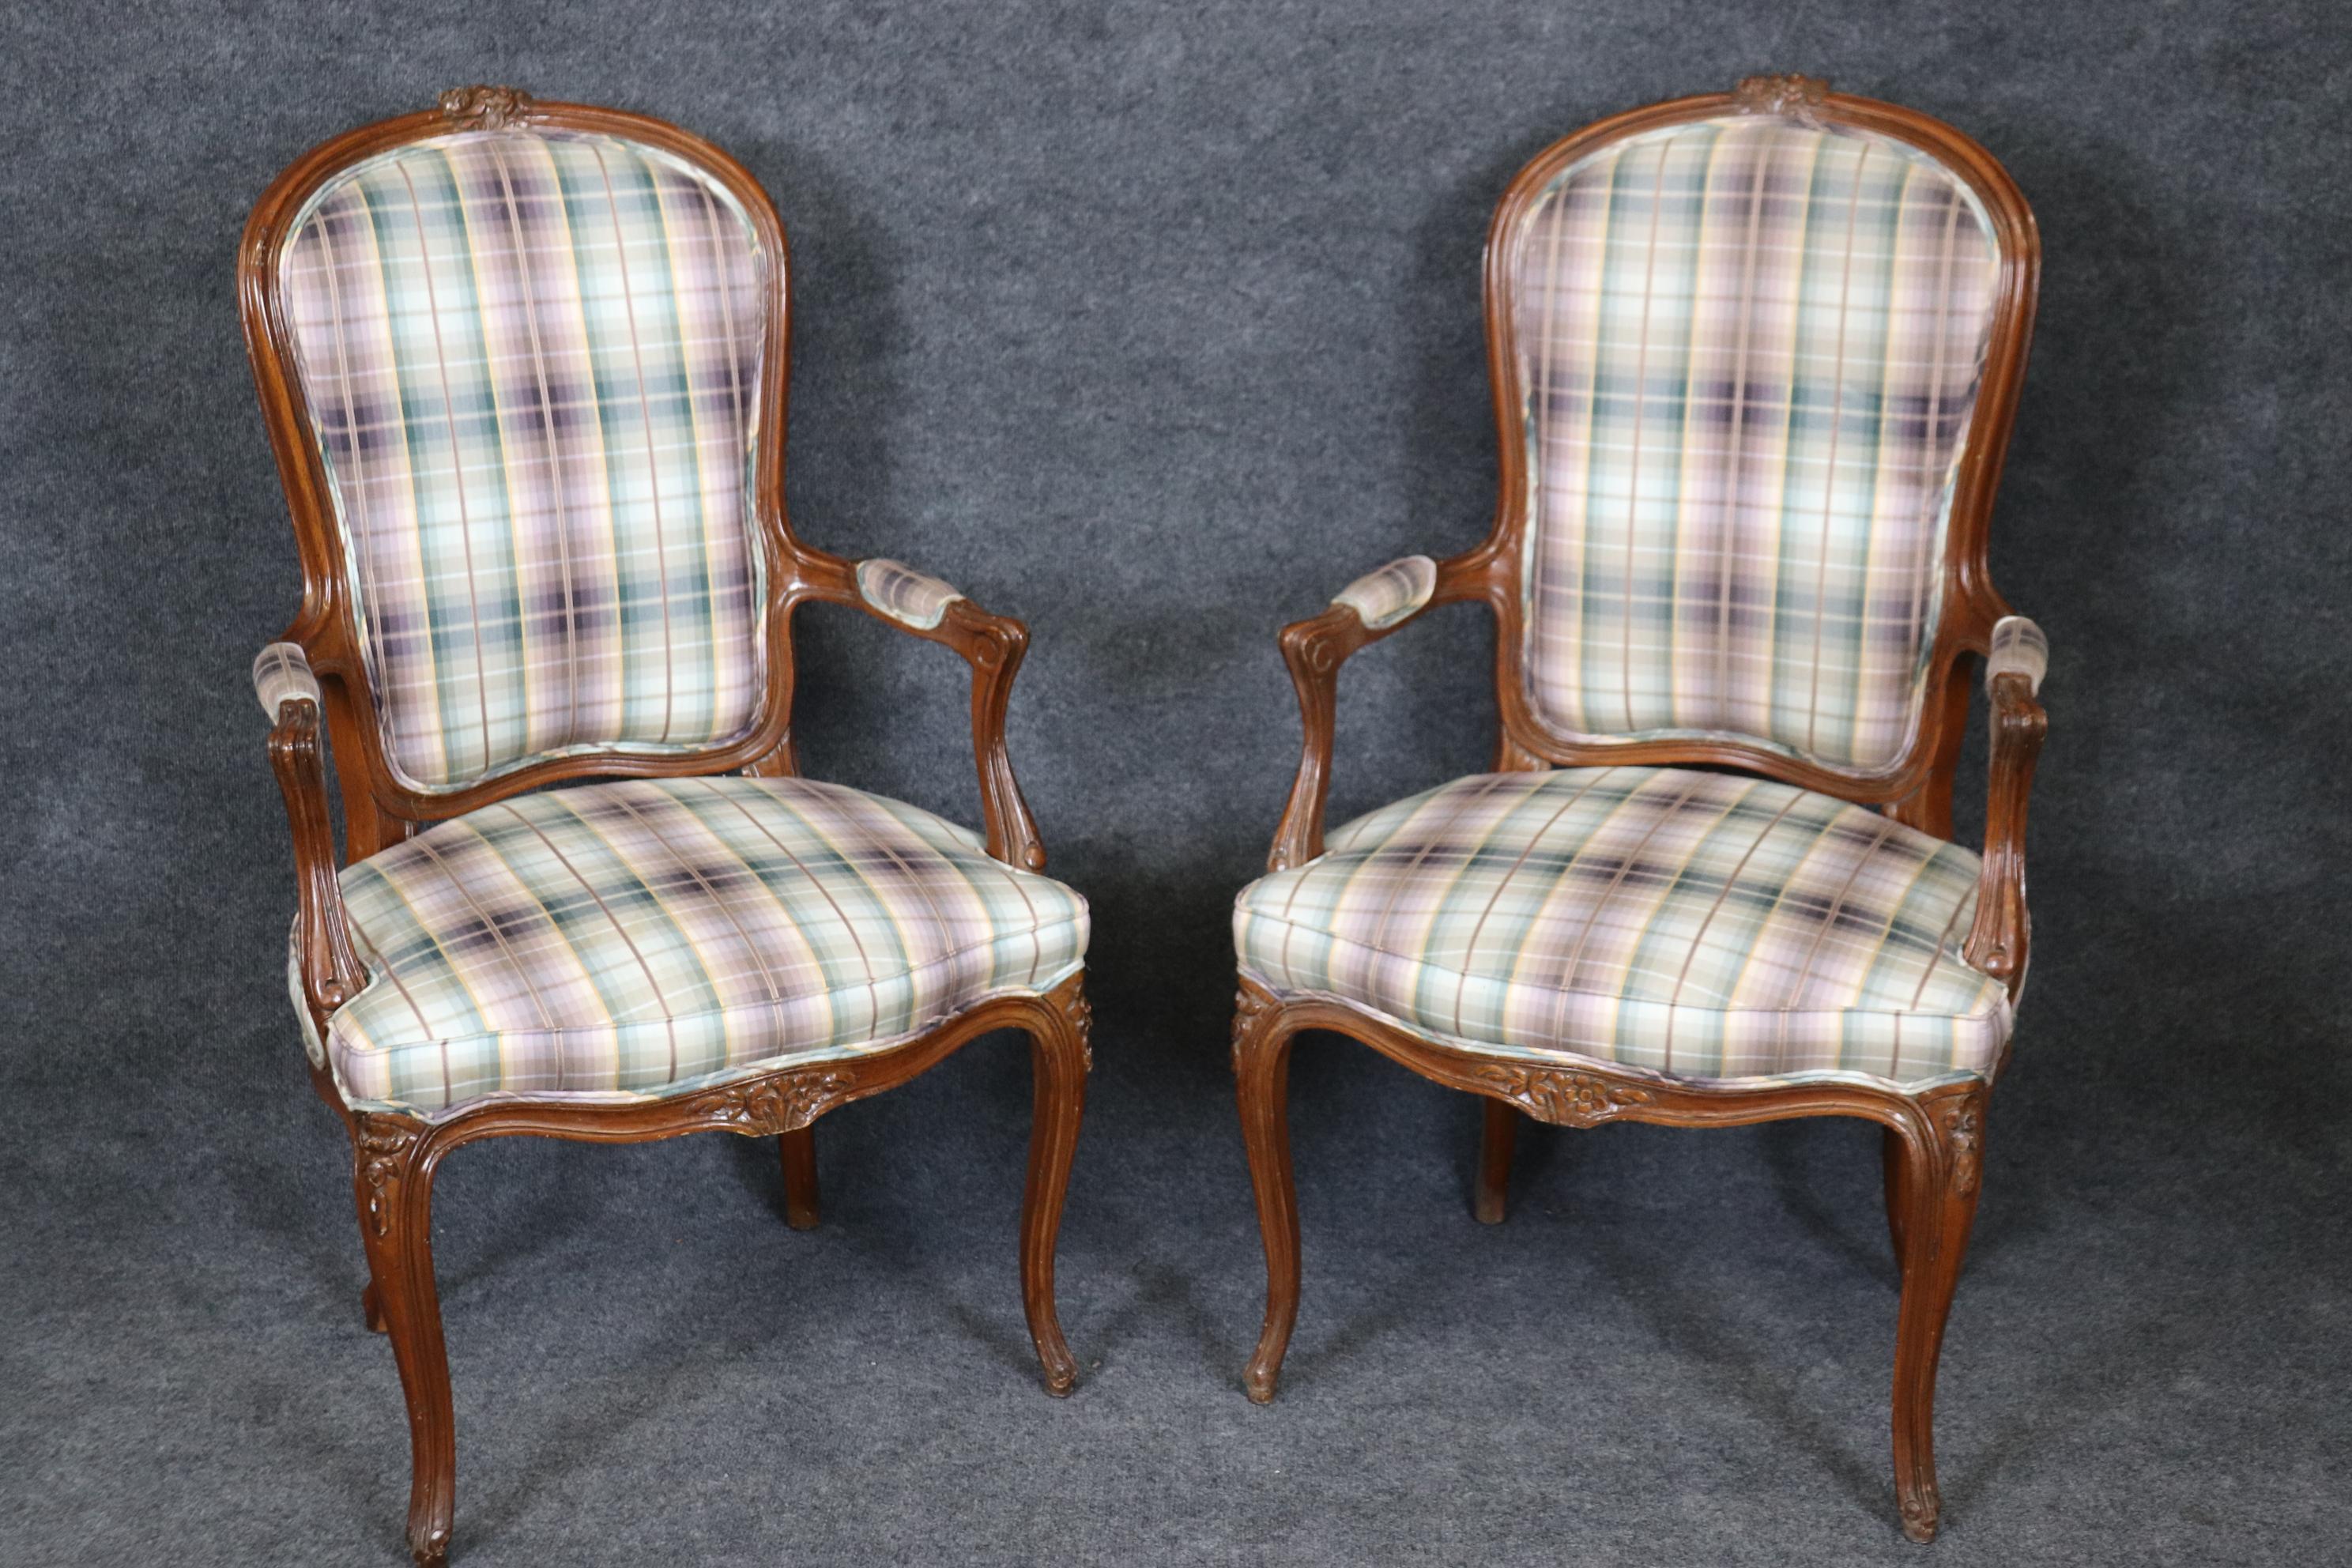  This is gorgeous set of cane back and two upholstered back dining chairs with carved walnut frames and plaid upholstery in pastel tones in good condition. These are cane chairs so please expect small holes and frays to cane here or there. The